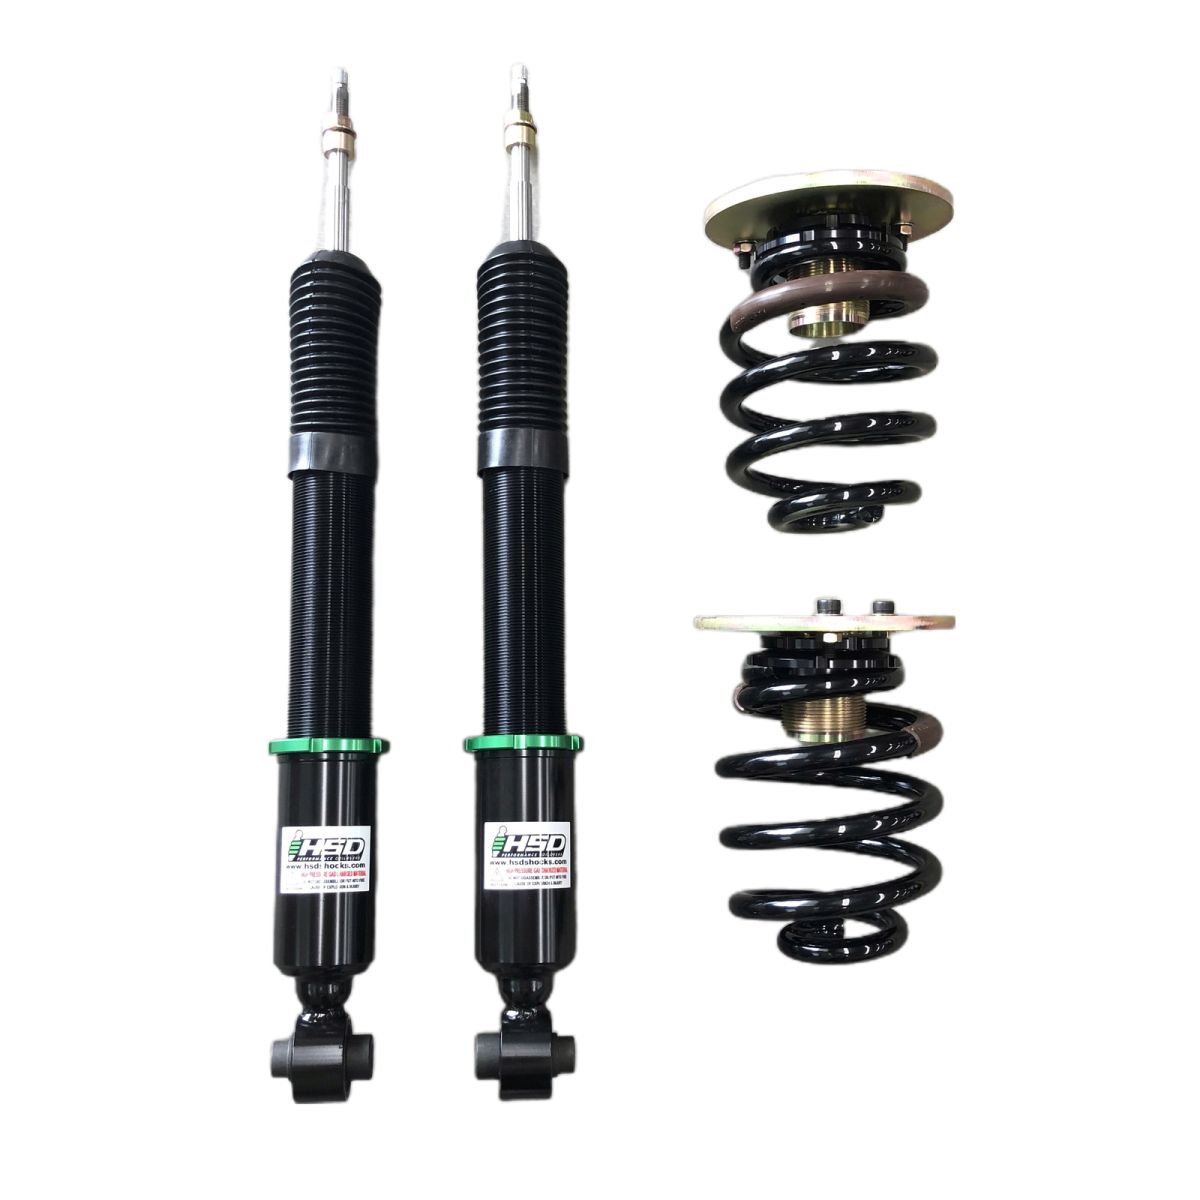 holden-commodore-coilovers-rear-hsd